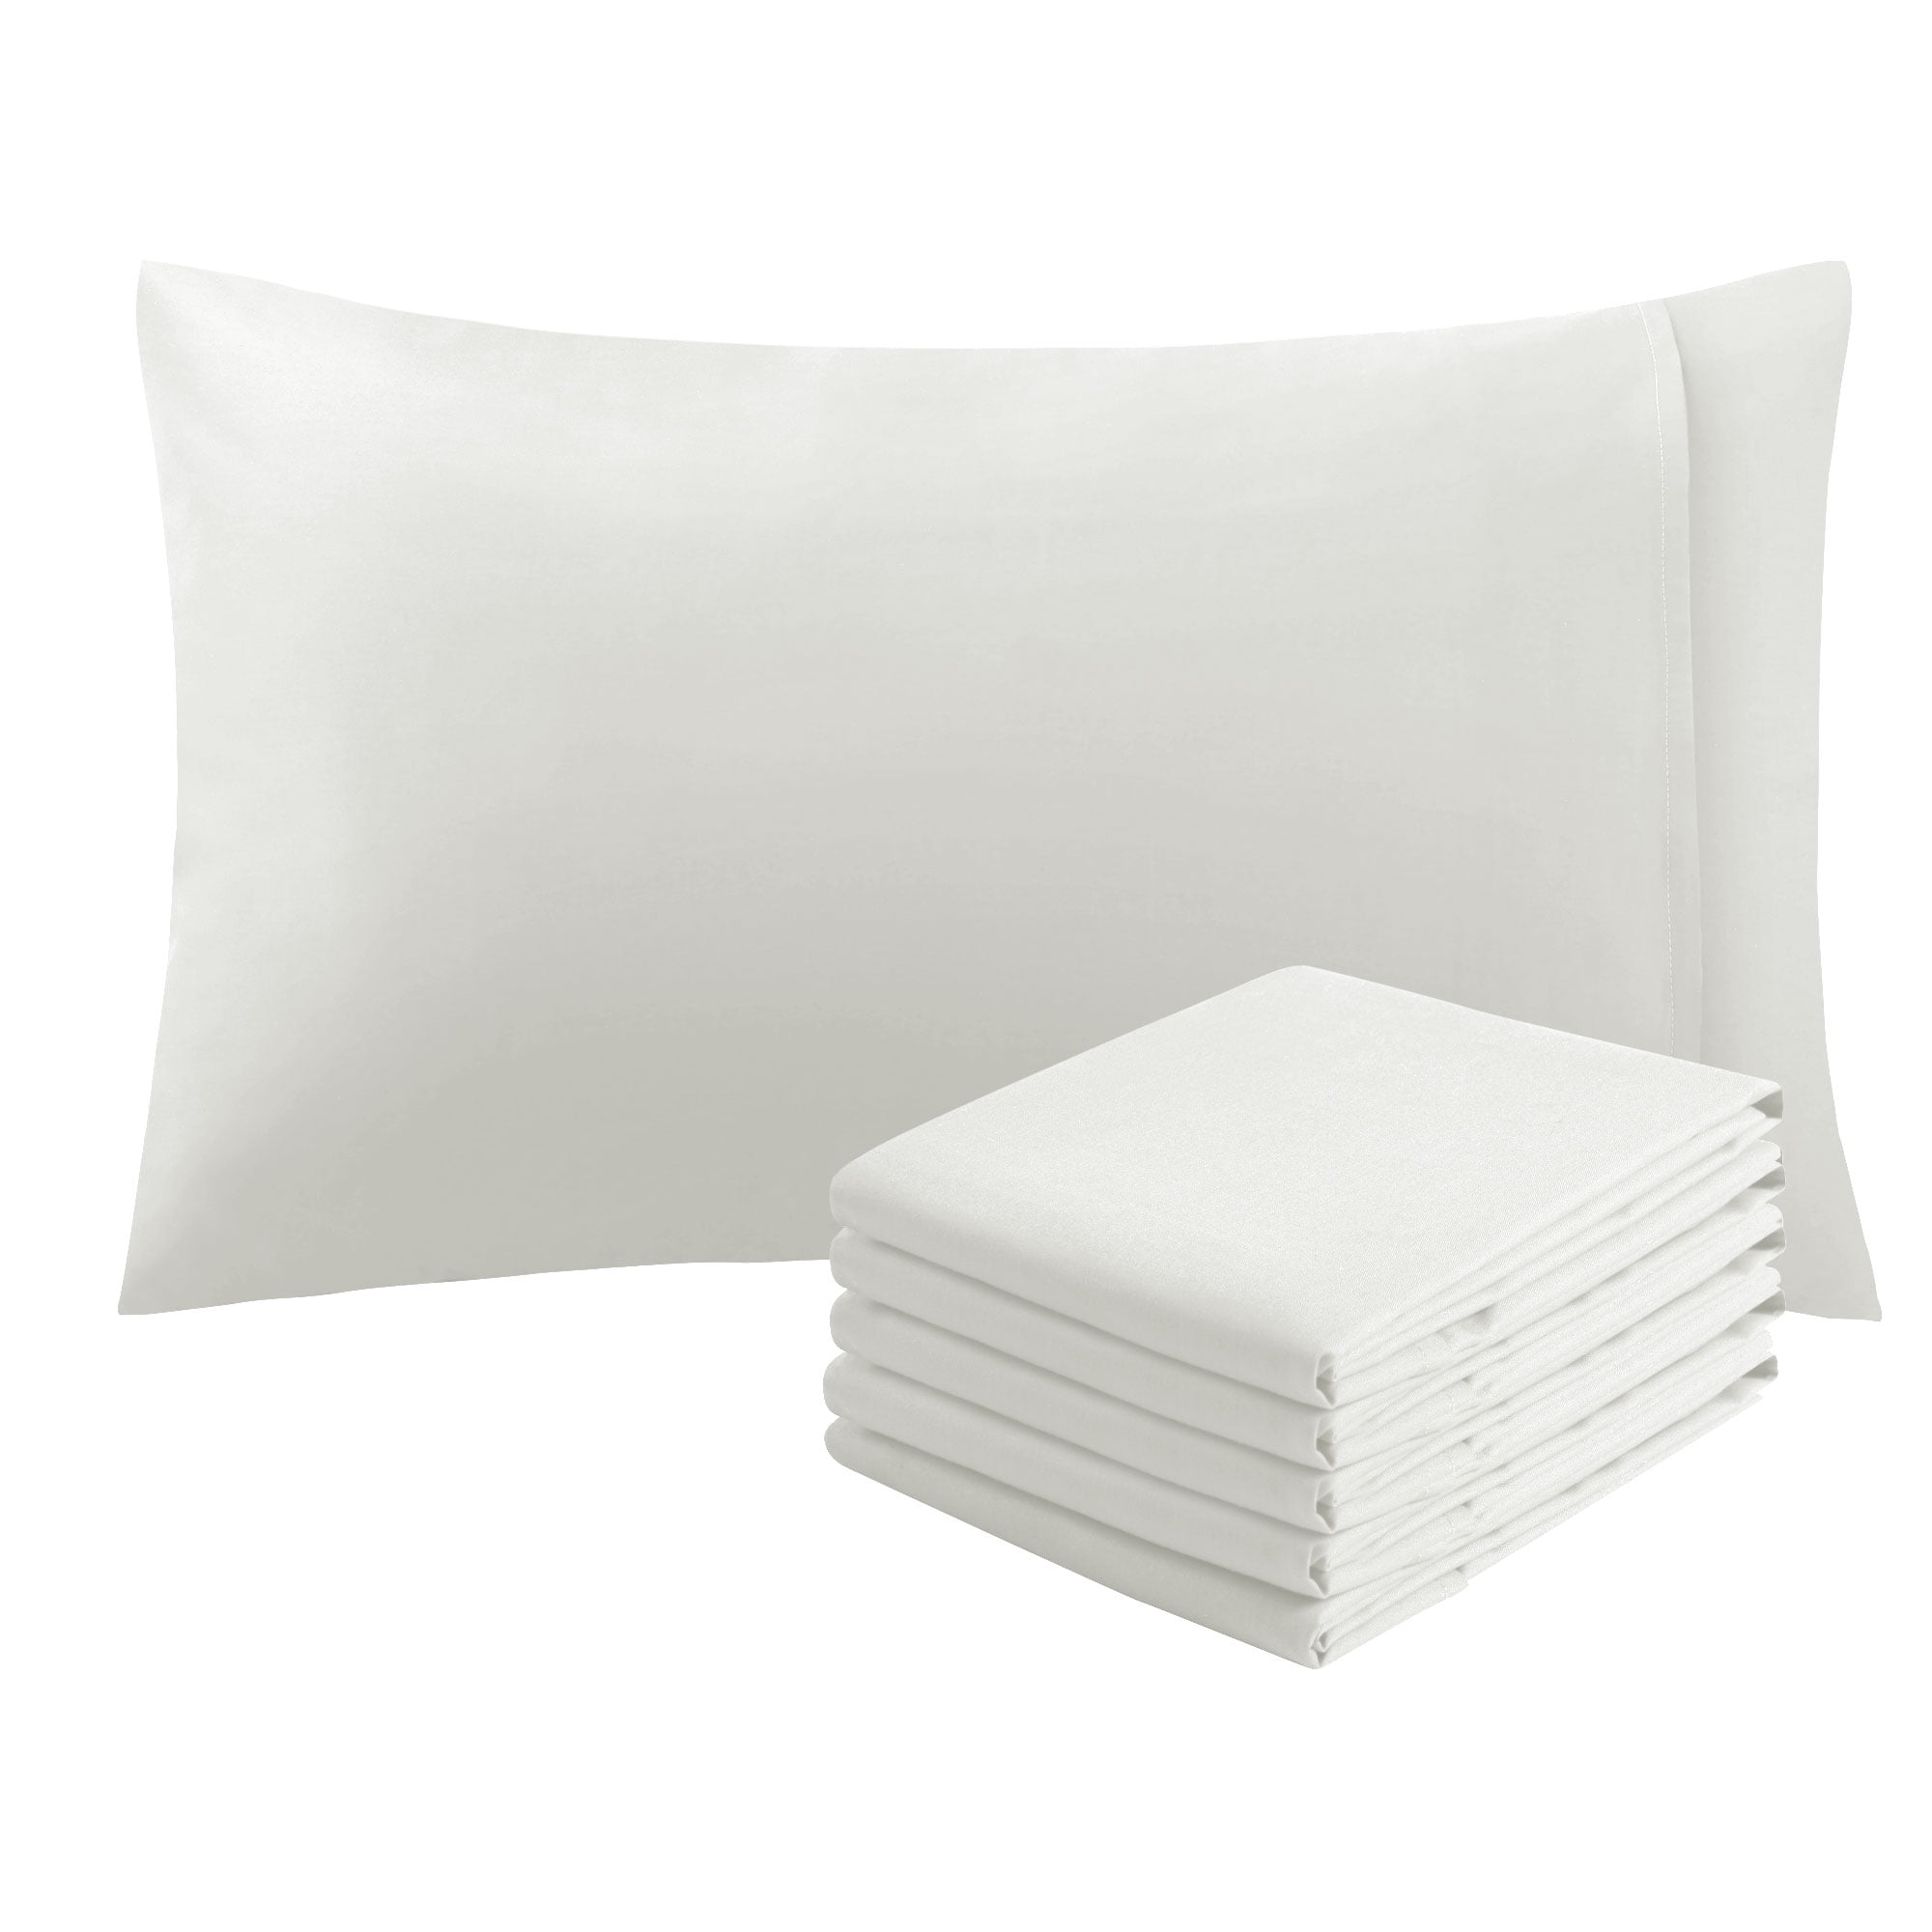 55 new white standard 20''x32'' size hotel pillow cases covers t-180 wholesale!! 